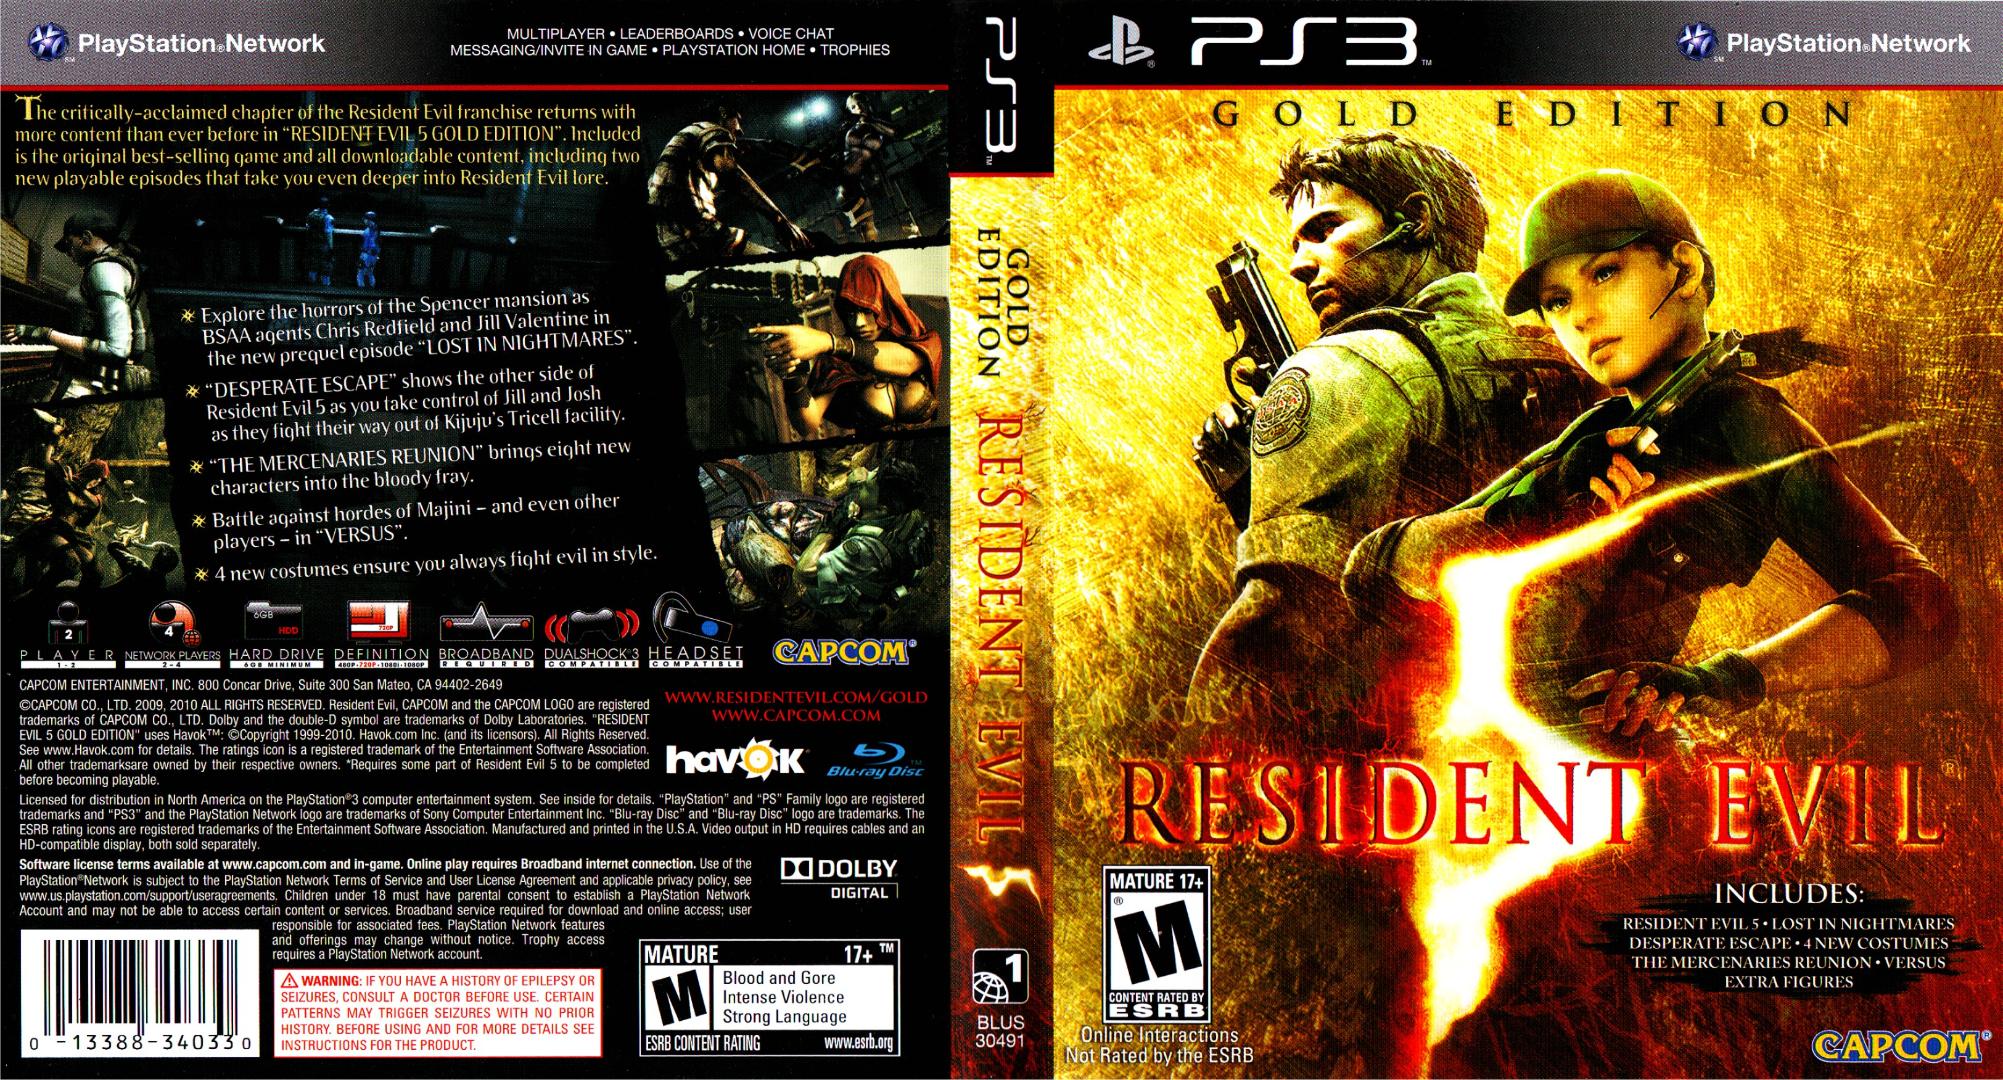 Resident evil 3 ps5. Resident Evil 5 Gold Edition ps3 обложка. Resident Evil 5 ps3 обложка. Resident Evil ps3 диск. Resident Evil игра на ps3.